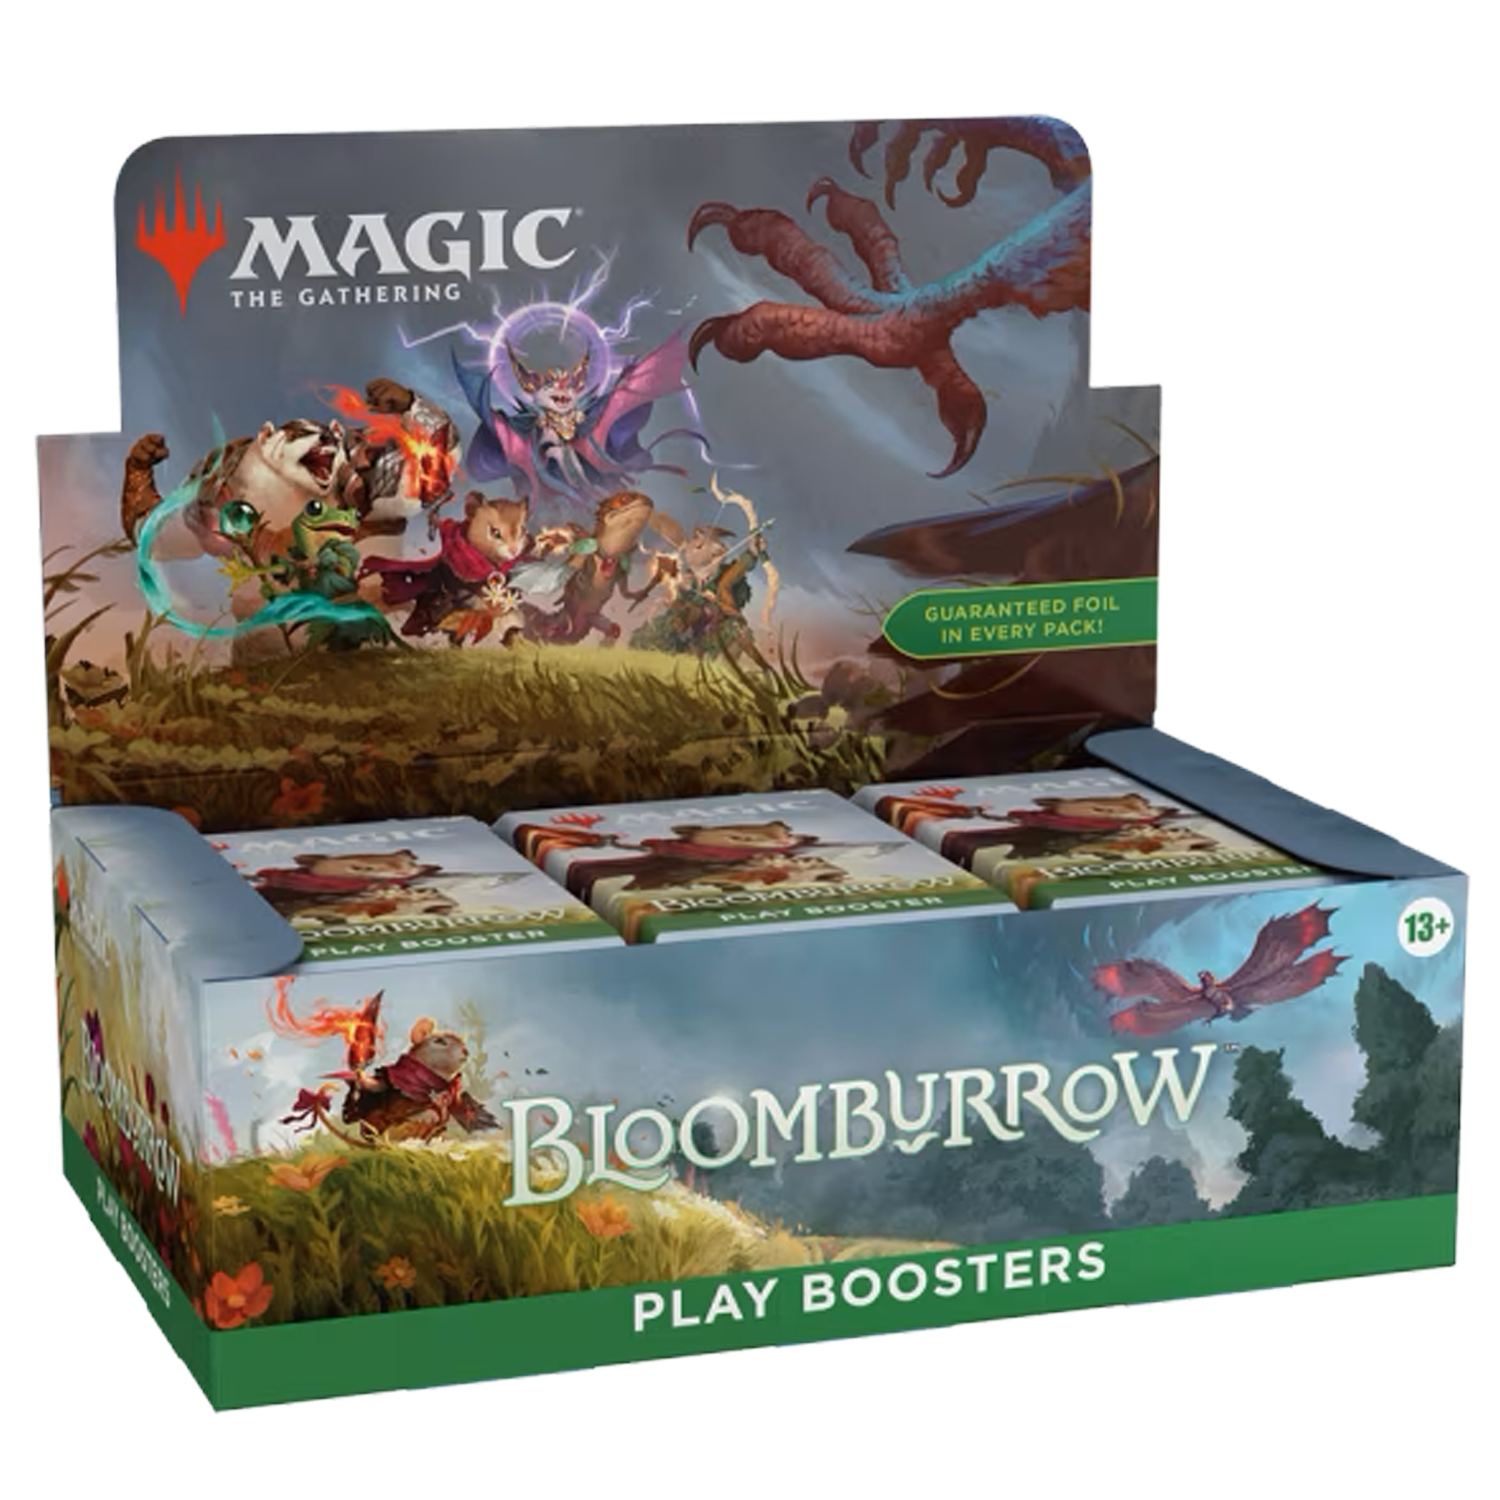 Bloomburrow Play Booster Display - Magic the Gathering - EN